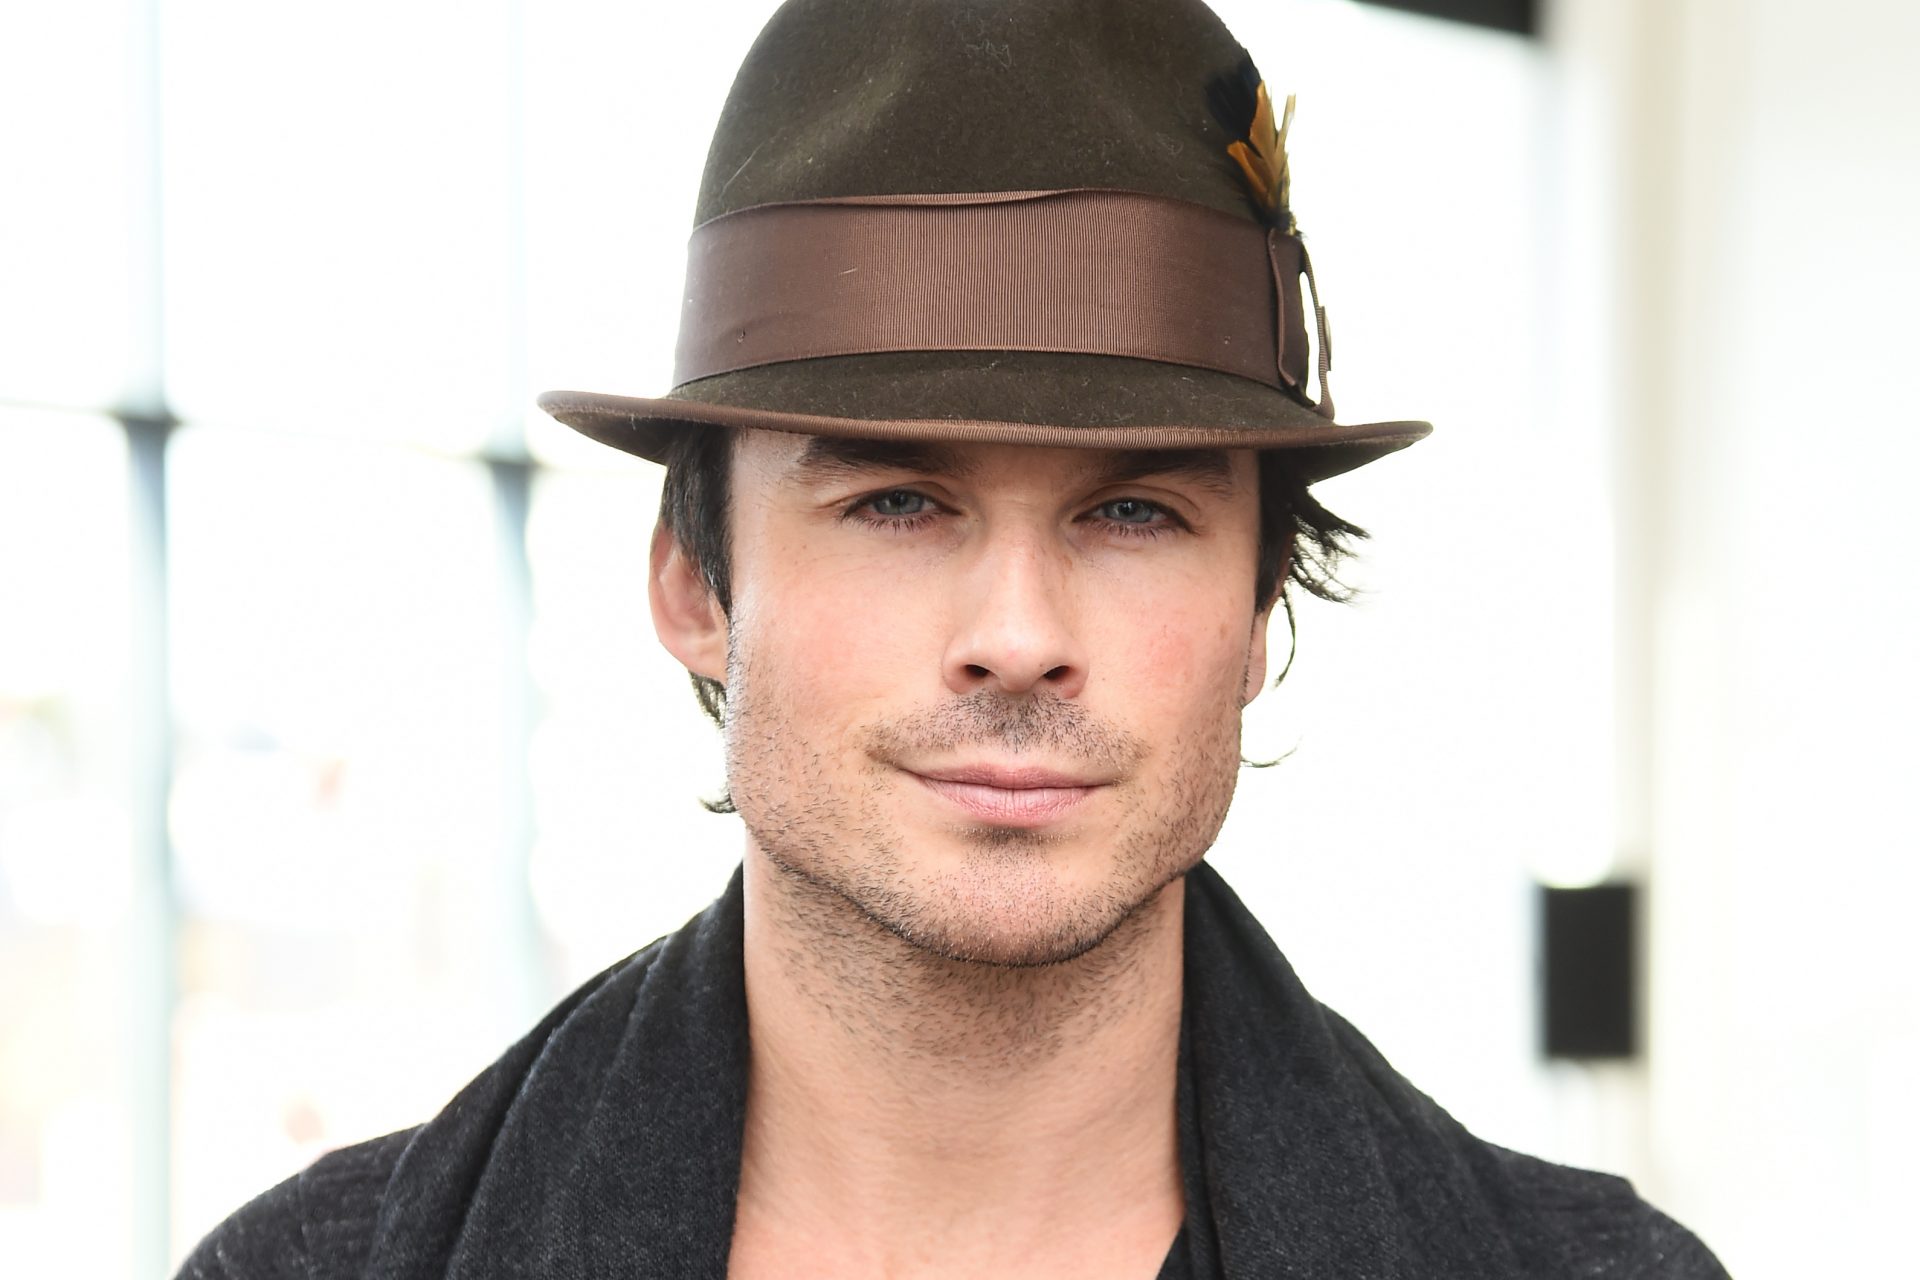 What's Ian Somerhalder from 'Lost' and 'Vampire Diaries' doing now?